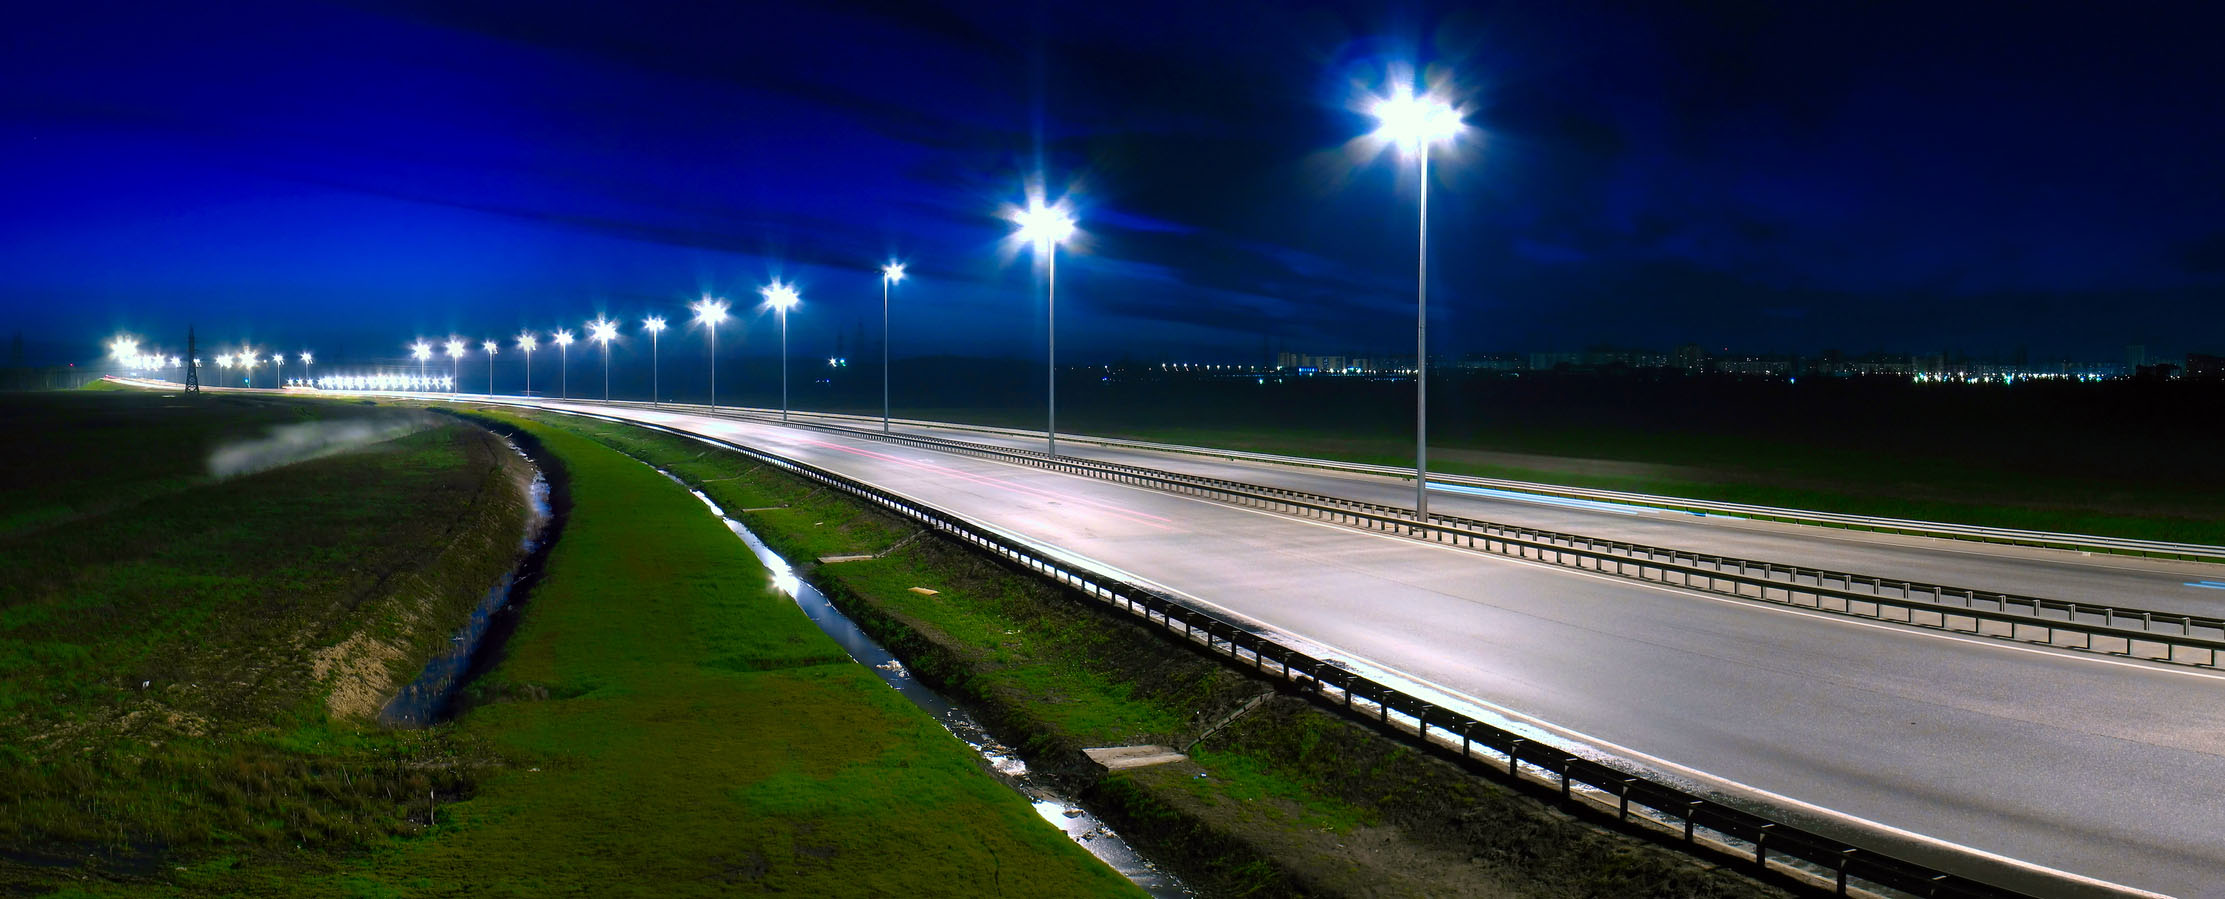 Applications of Outdoor Street Lighting products